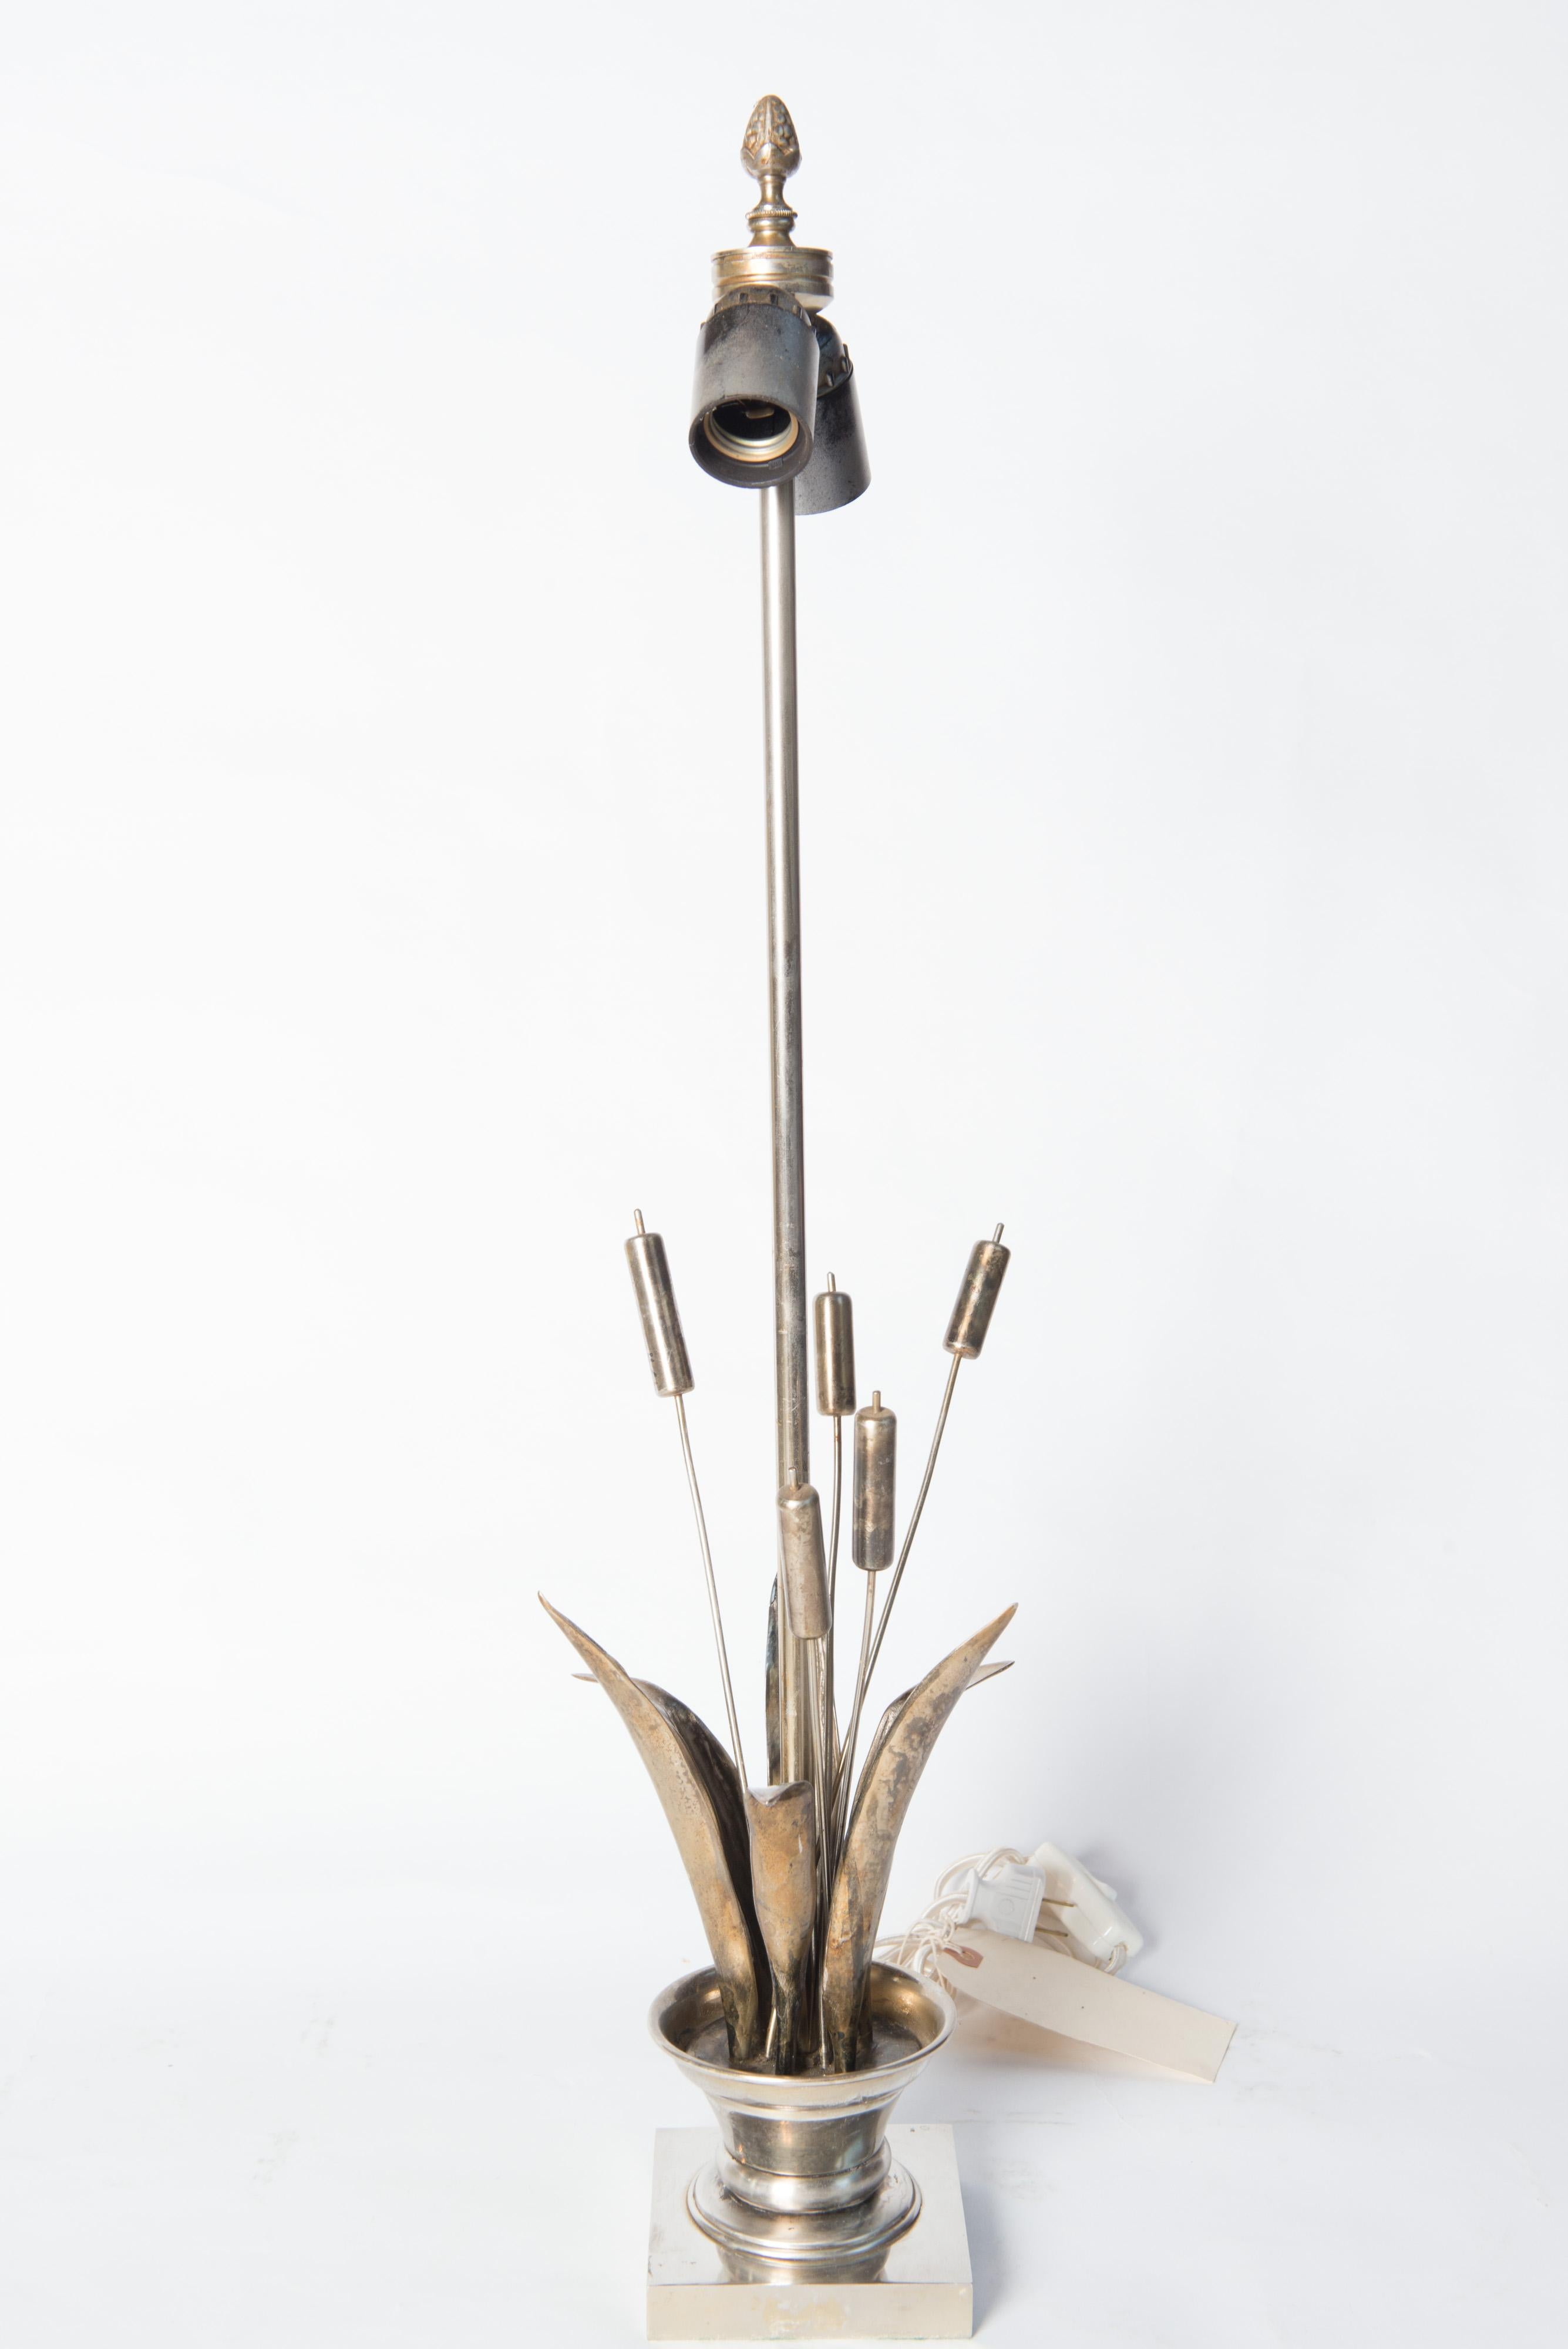 French silver bulrush Maison Charles style table lamp. Two sockets. 4.5 inch square base. Rewired.